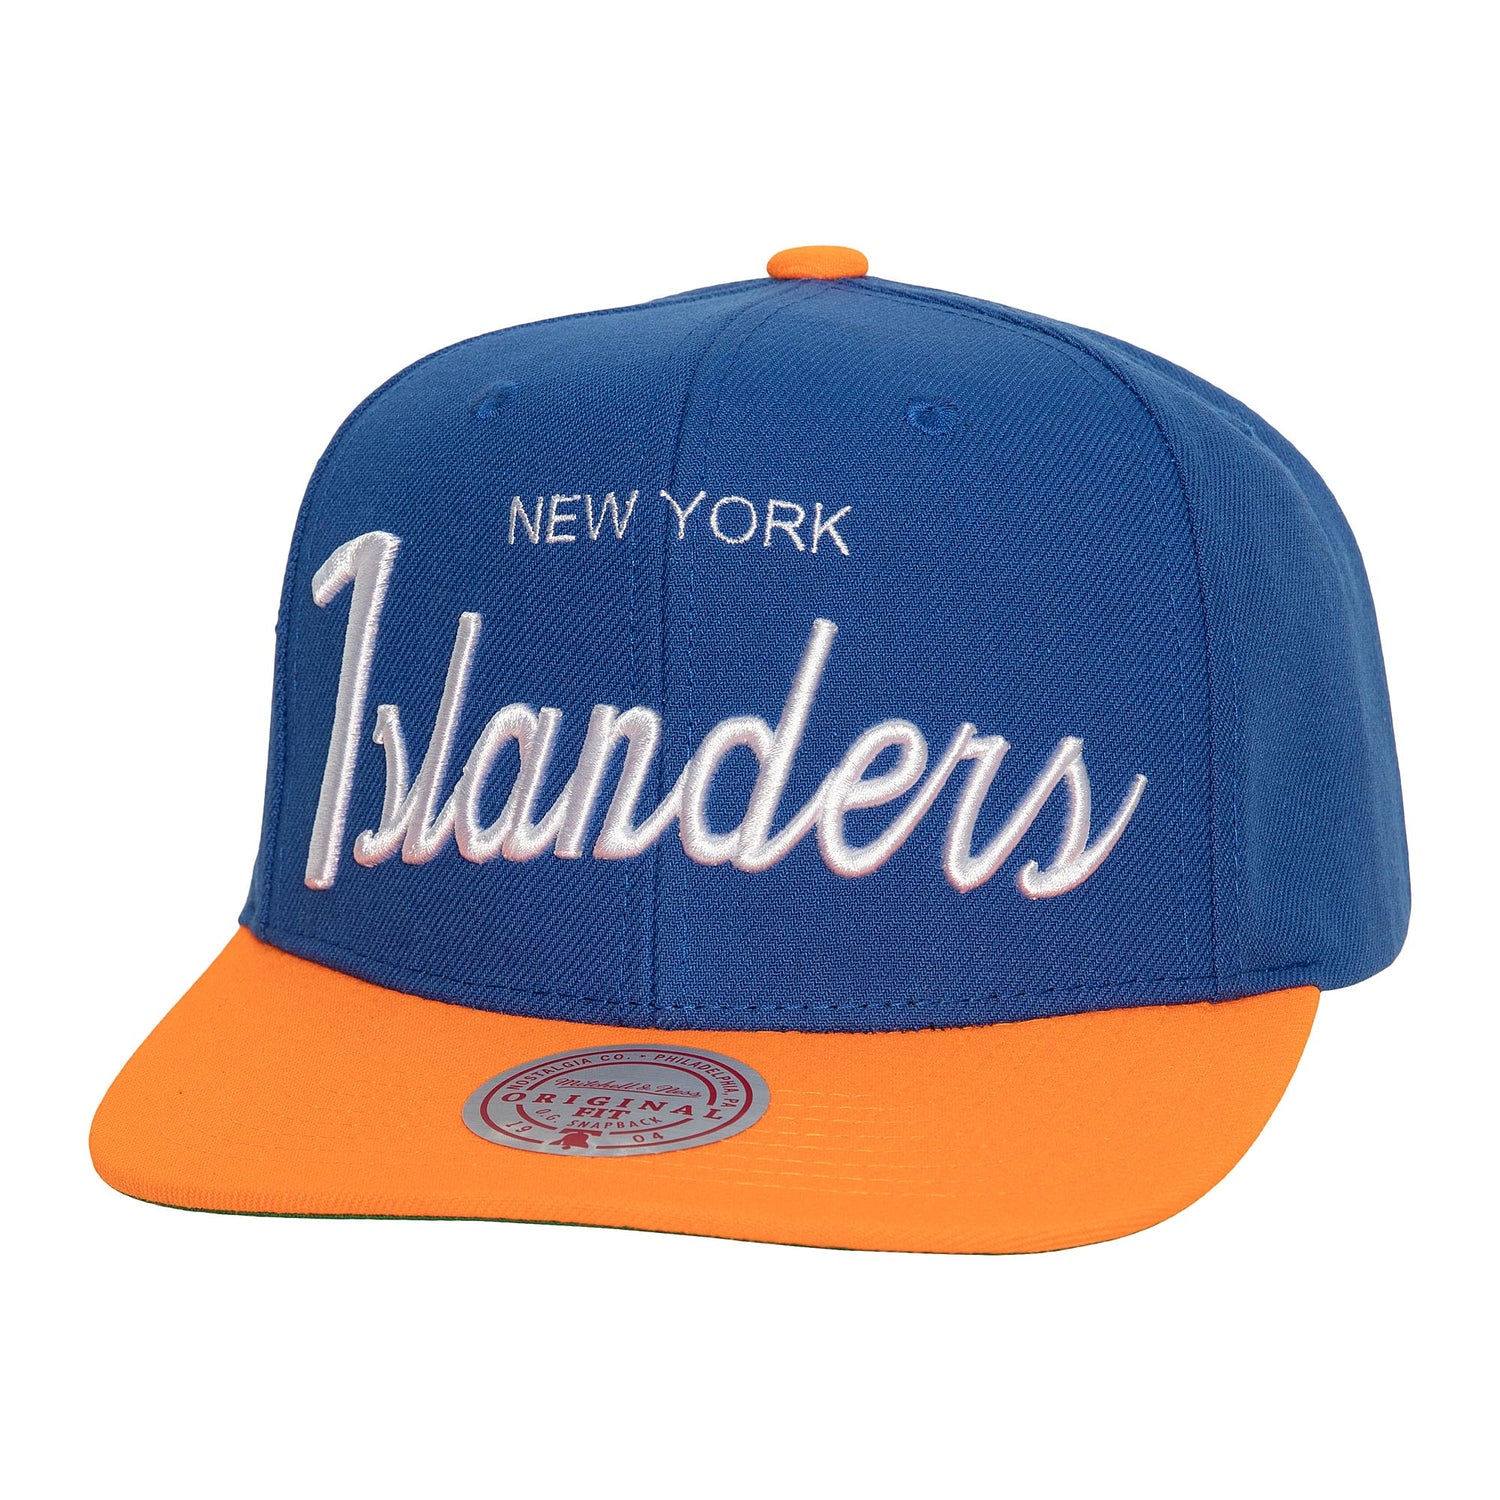 Mitchell & Ness - Snapbacks & Fitted Hats